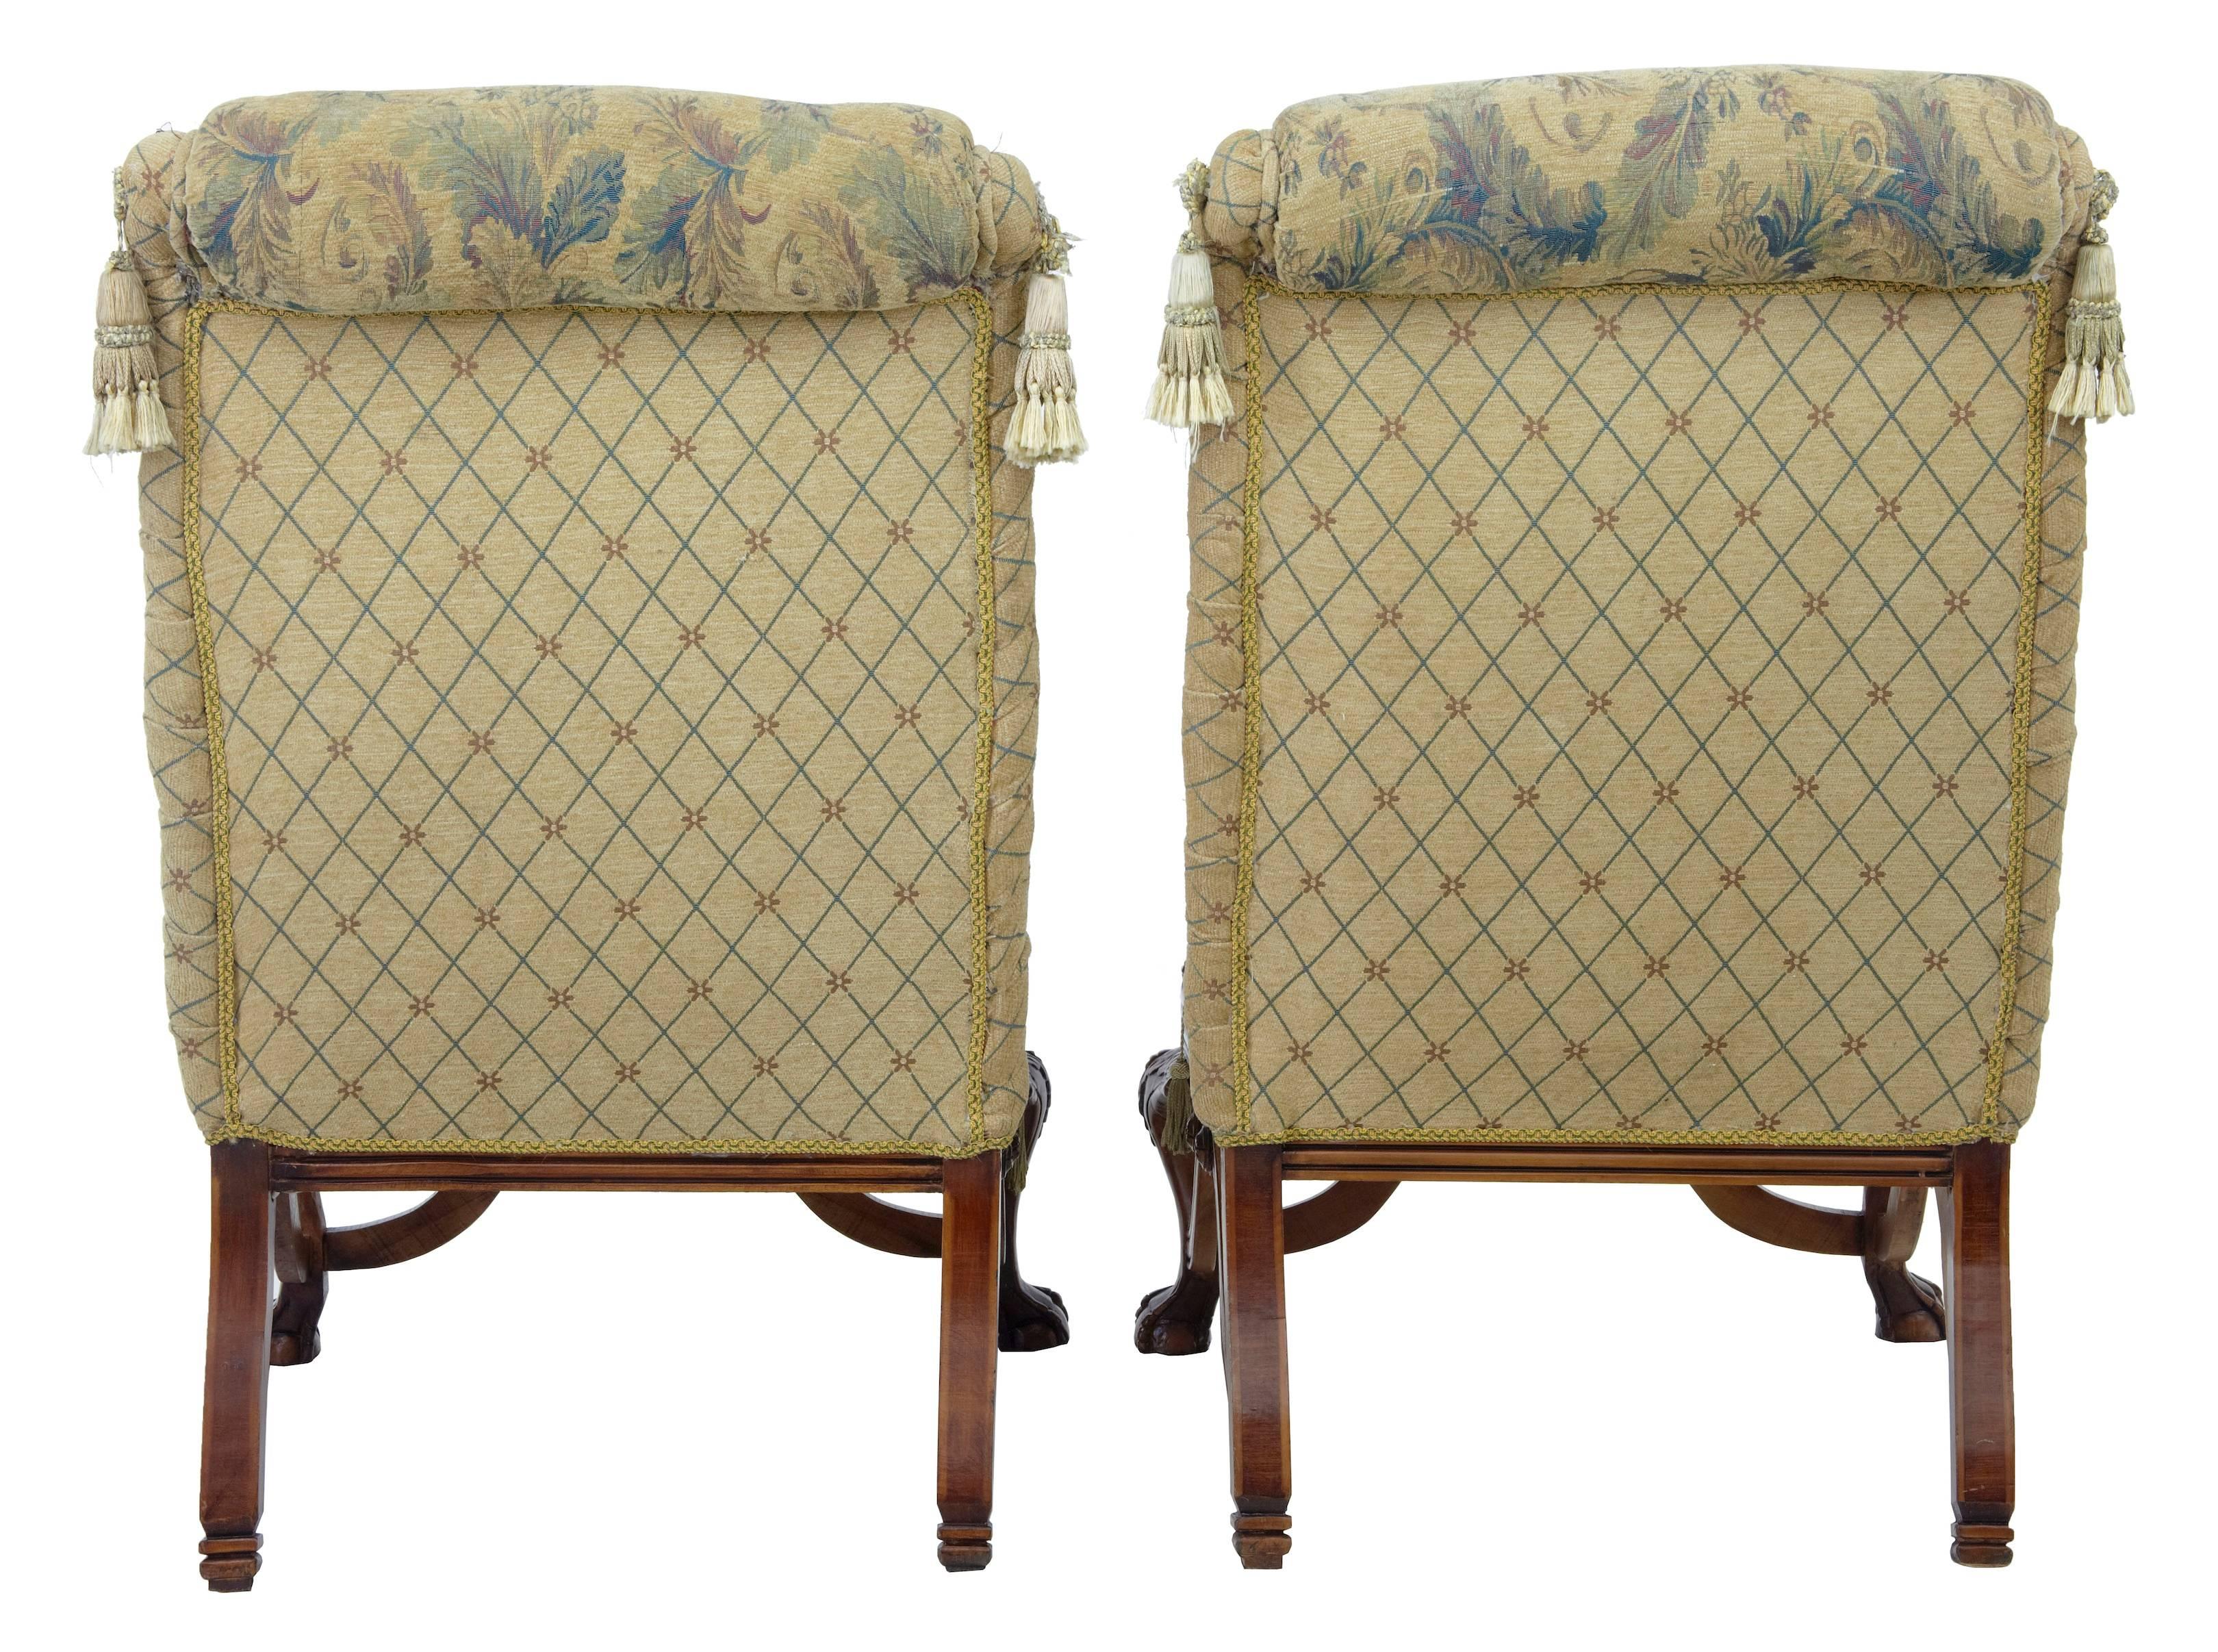 Rococo Revival Large Pair of Carved Hardwood Throne Armchairs